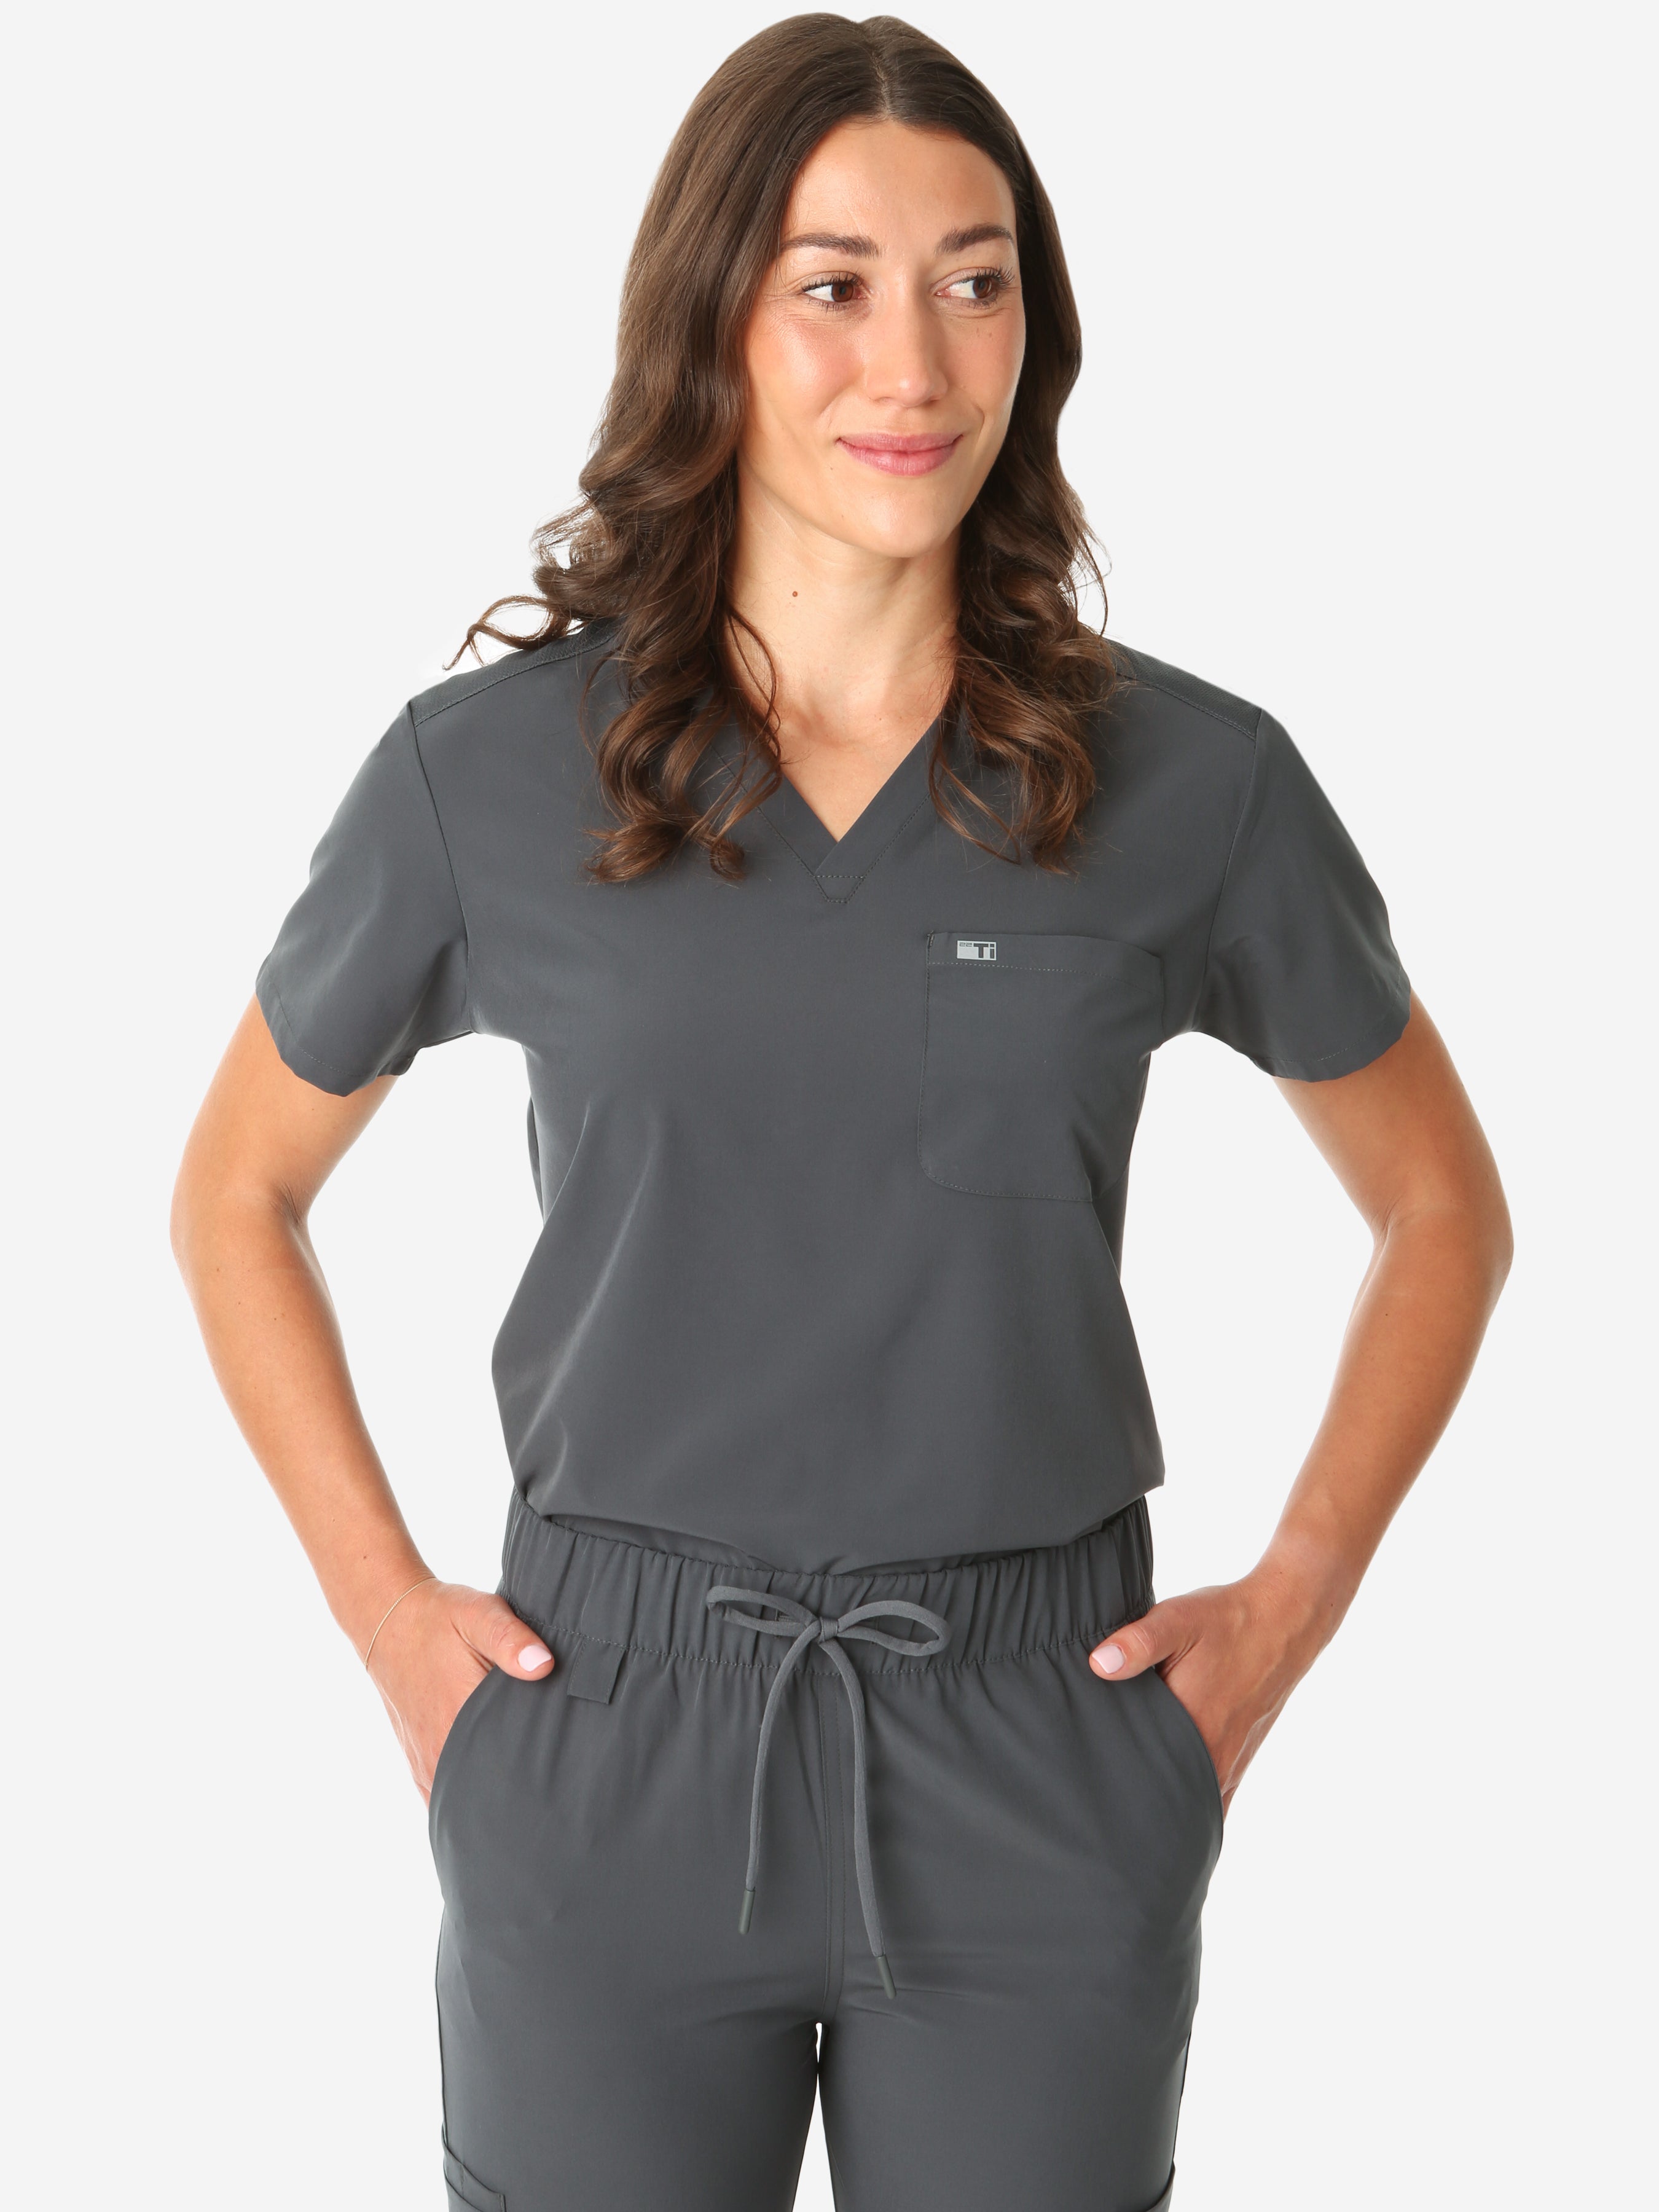 TiScrubs Women's Stretch One-Pocket Scrub Top Charcoal Gray Tucked Front Top Only